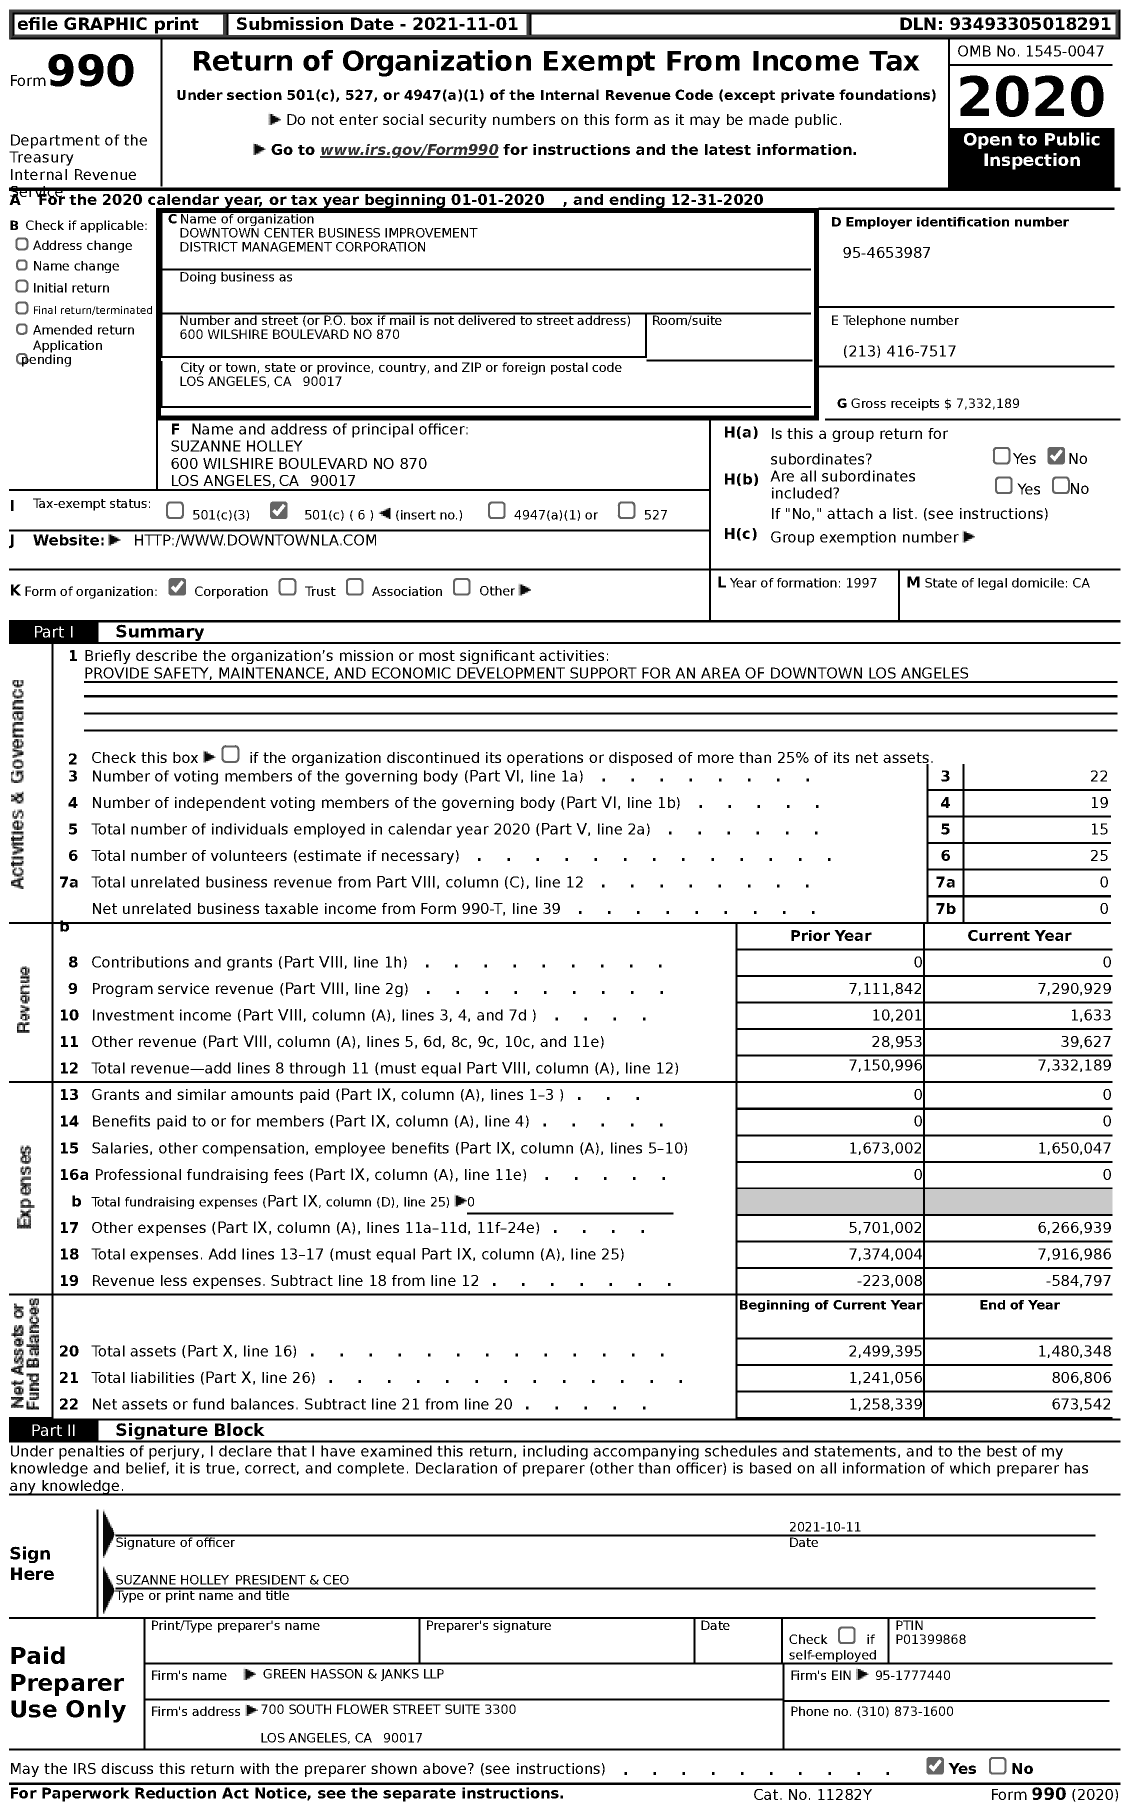 Image of first page of 2020 Form 990 for Downtown Center Business Improvement District Management Corporation